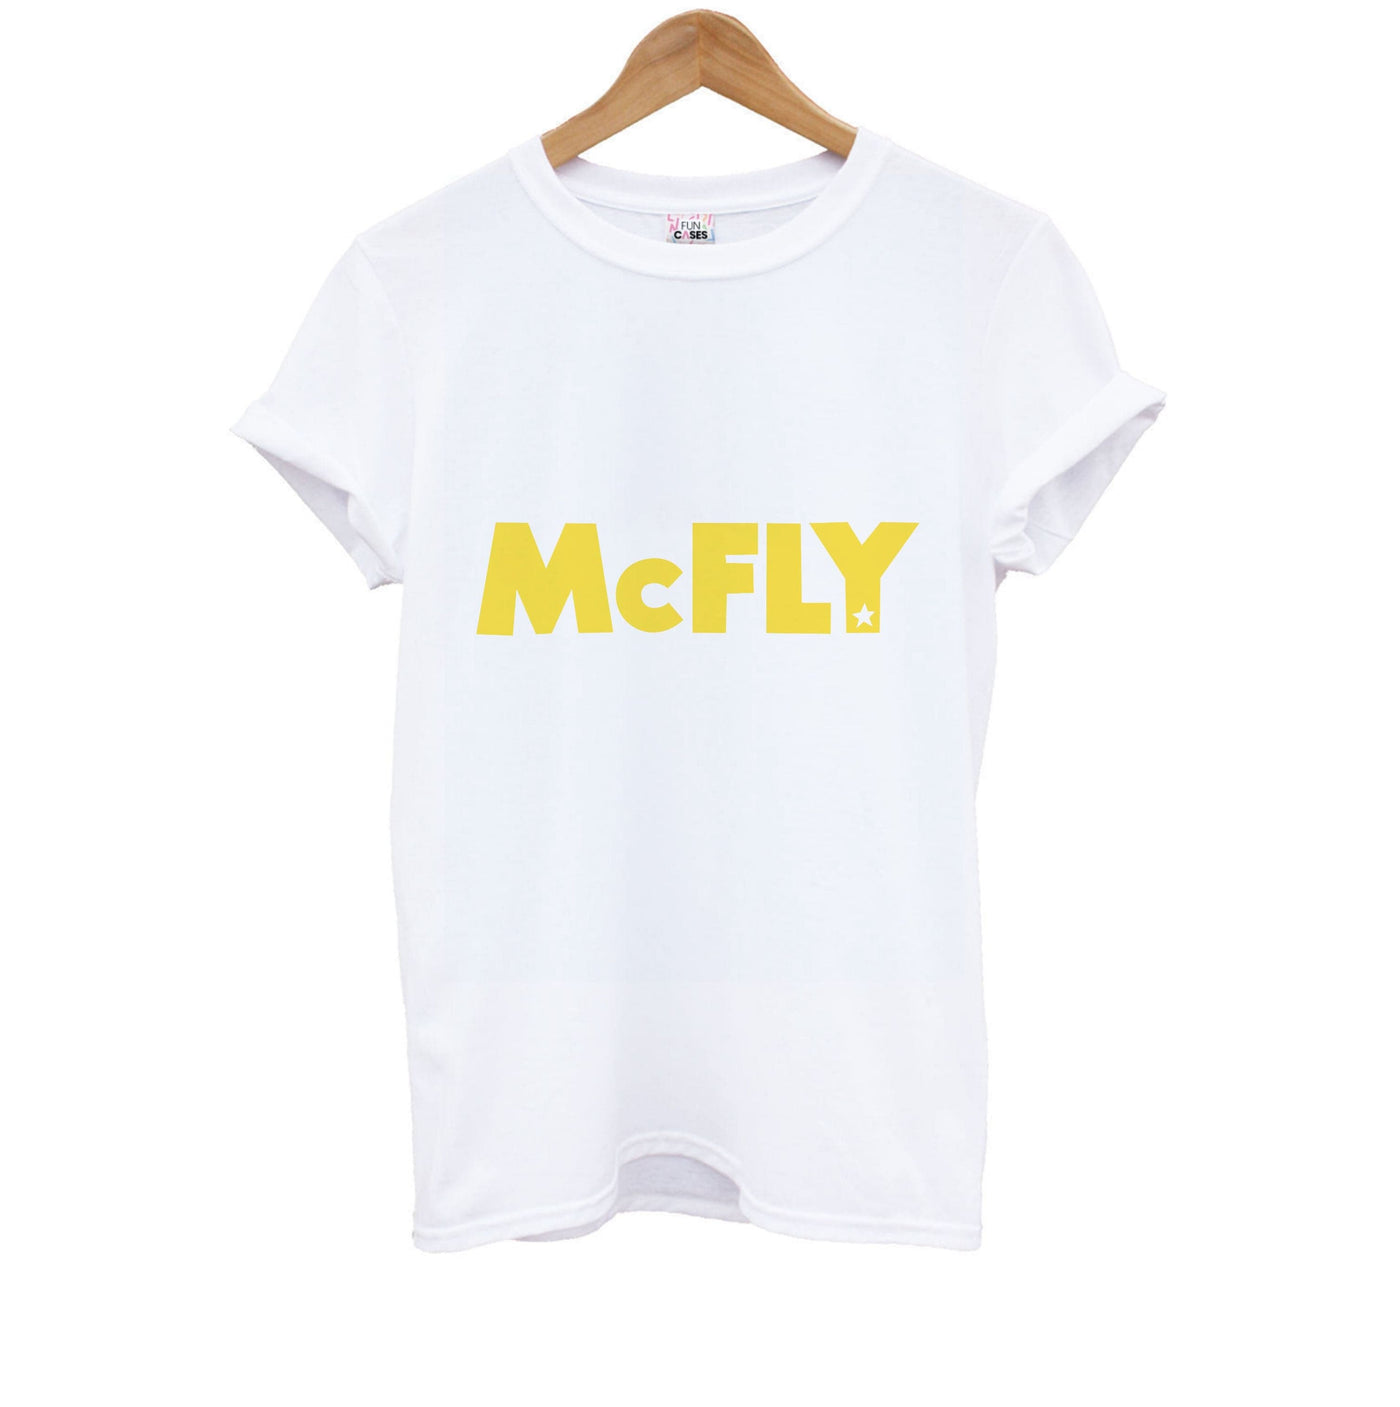 Blue And Yelllow - McFly Kids T-Shirt